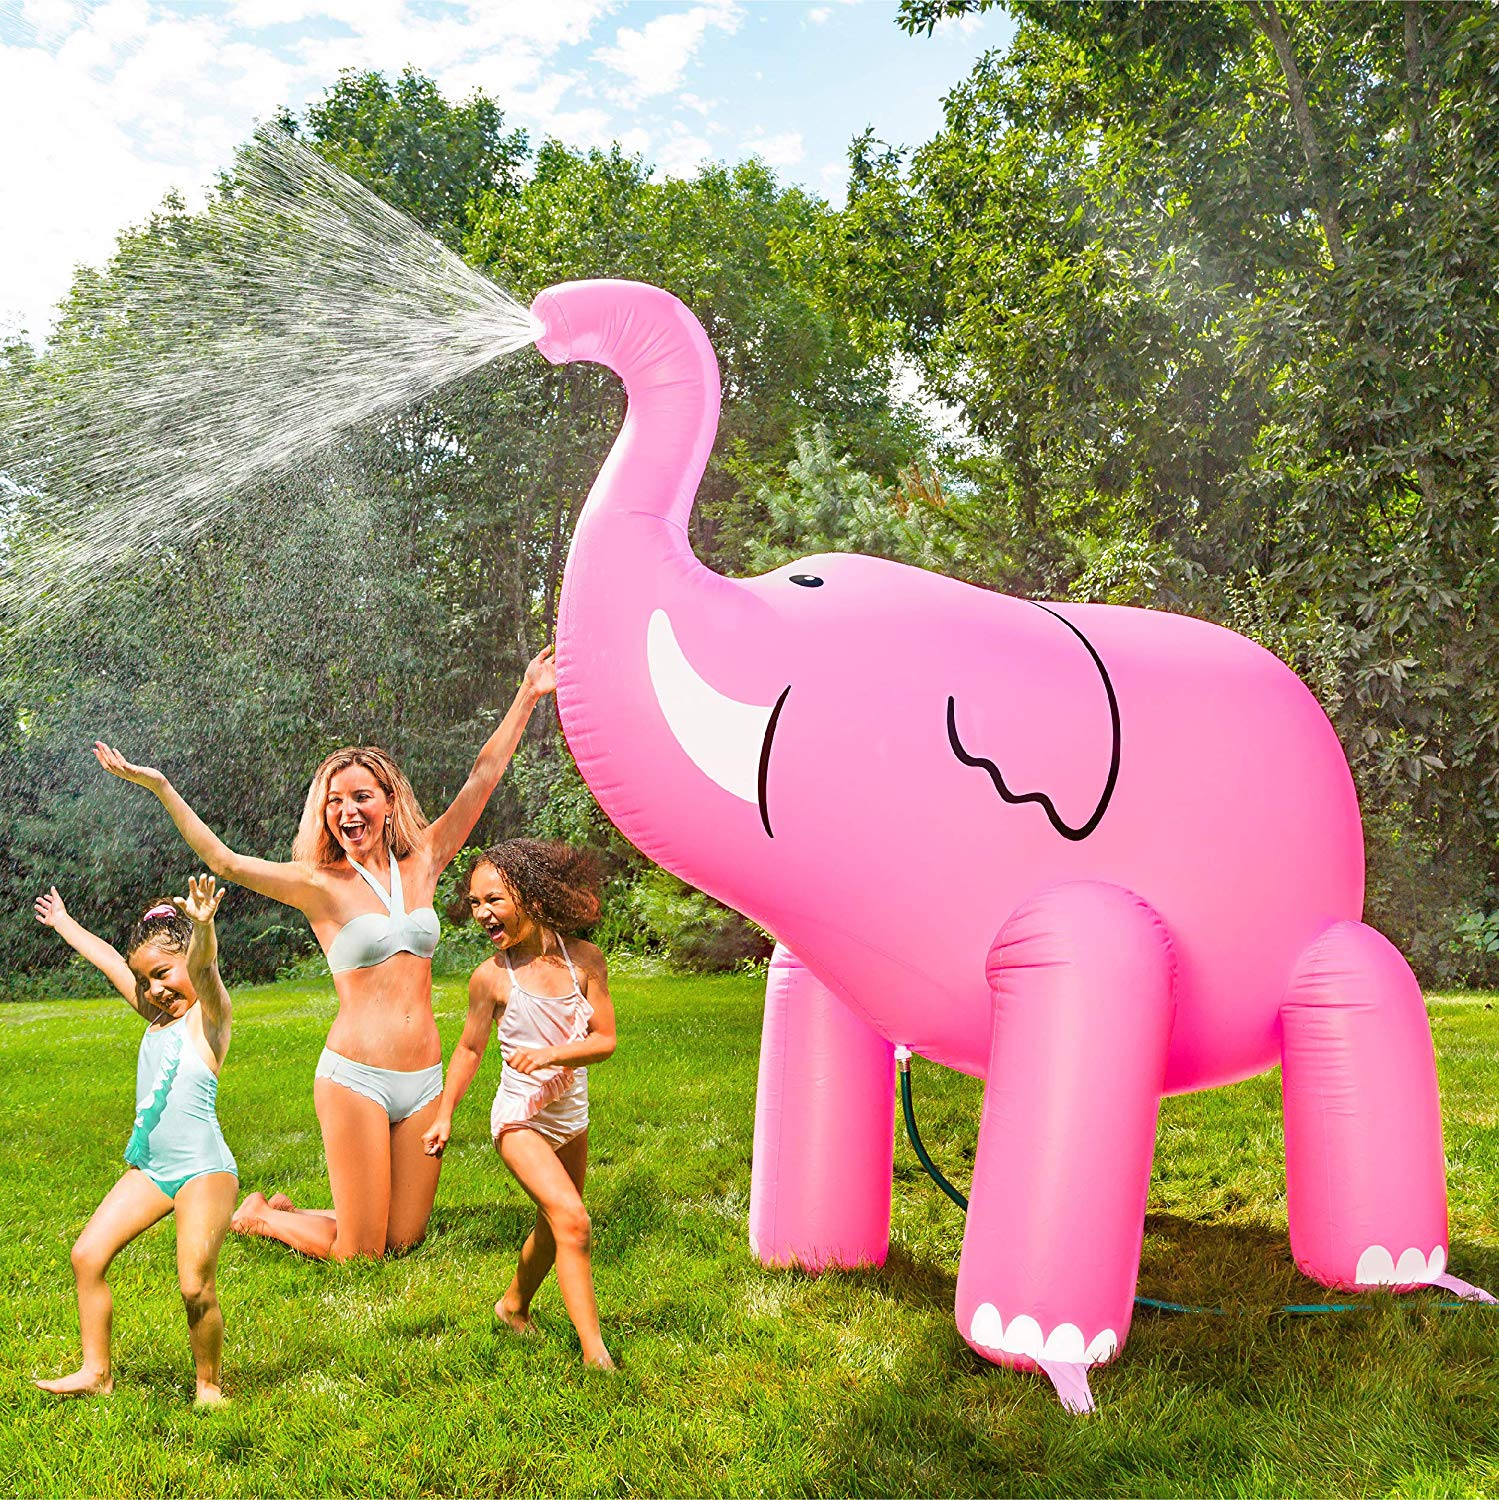 These Sprinklers Will Have Your Kids Outside All Summer - Tinybeans